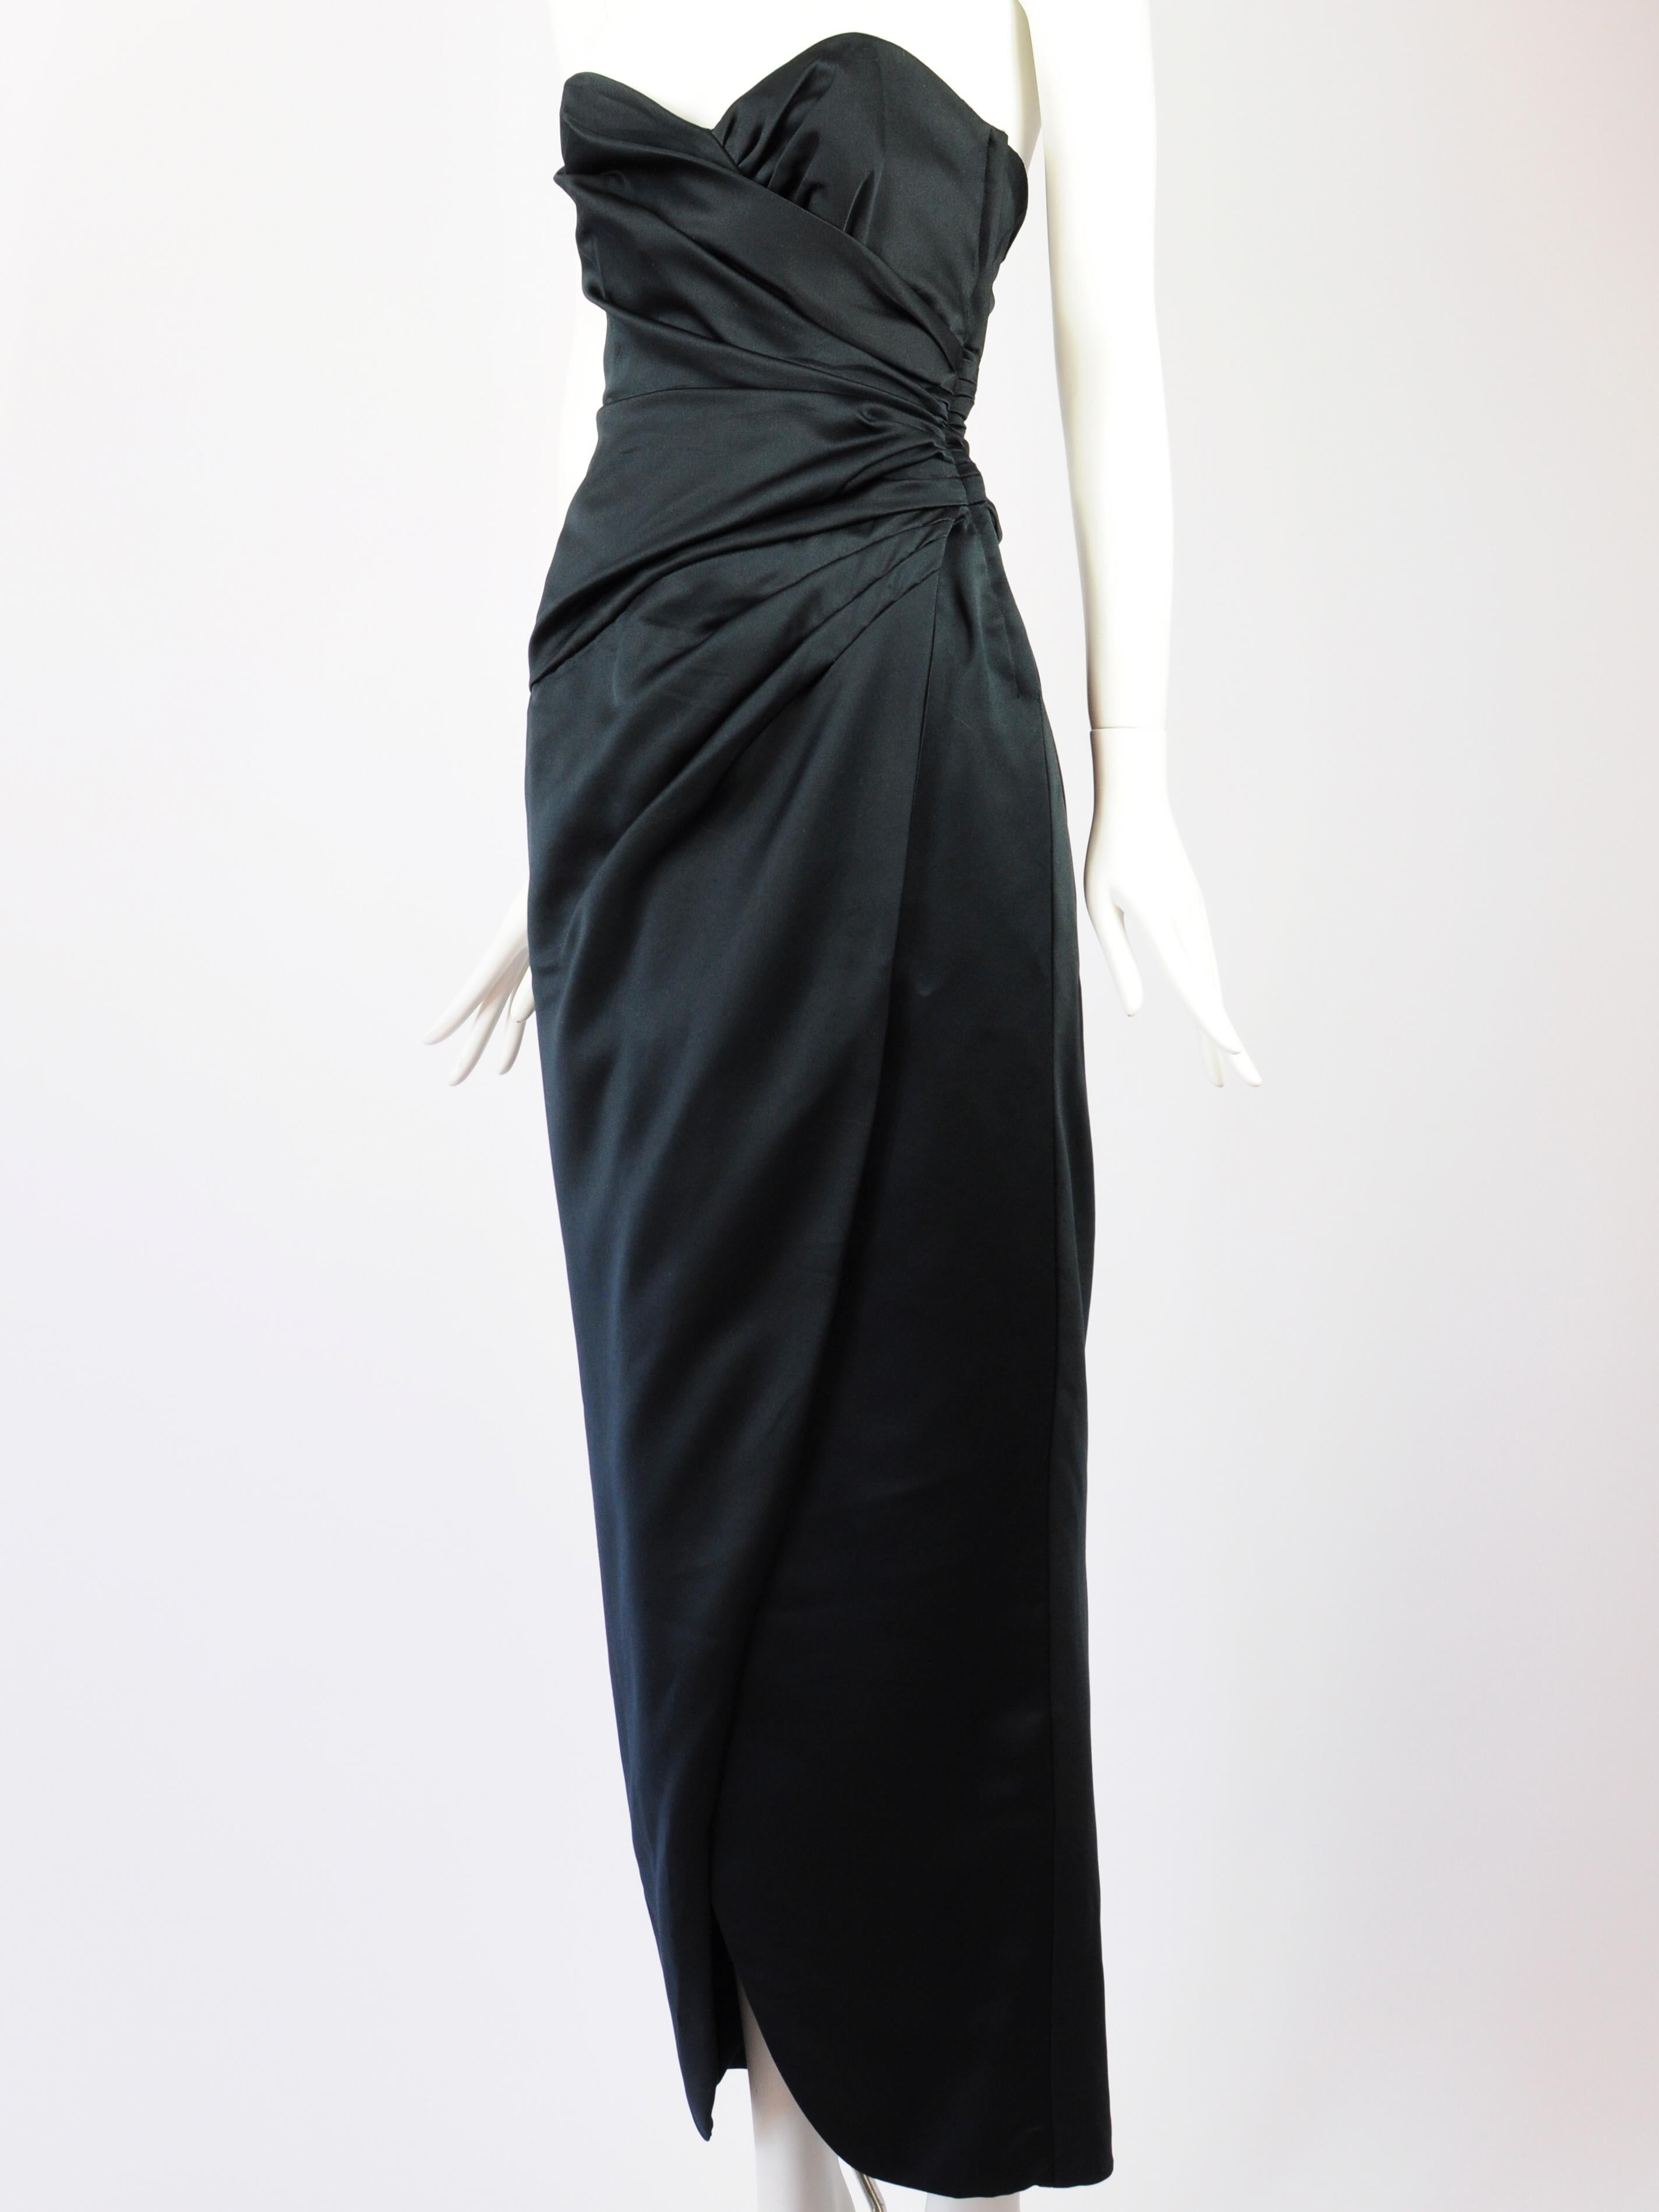 Victor Costa Black Dress Strapless Structured Draped Satin 1980s In Good Condition For Sale In AMSTERDAM, NL